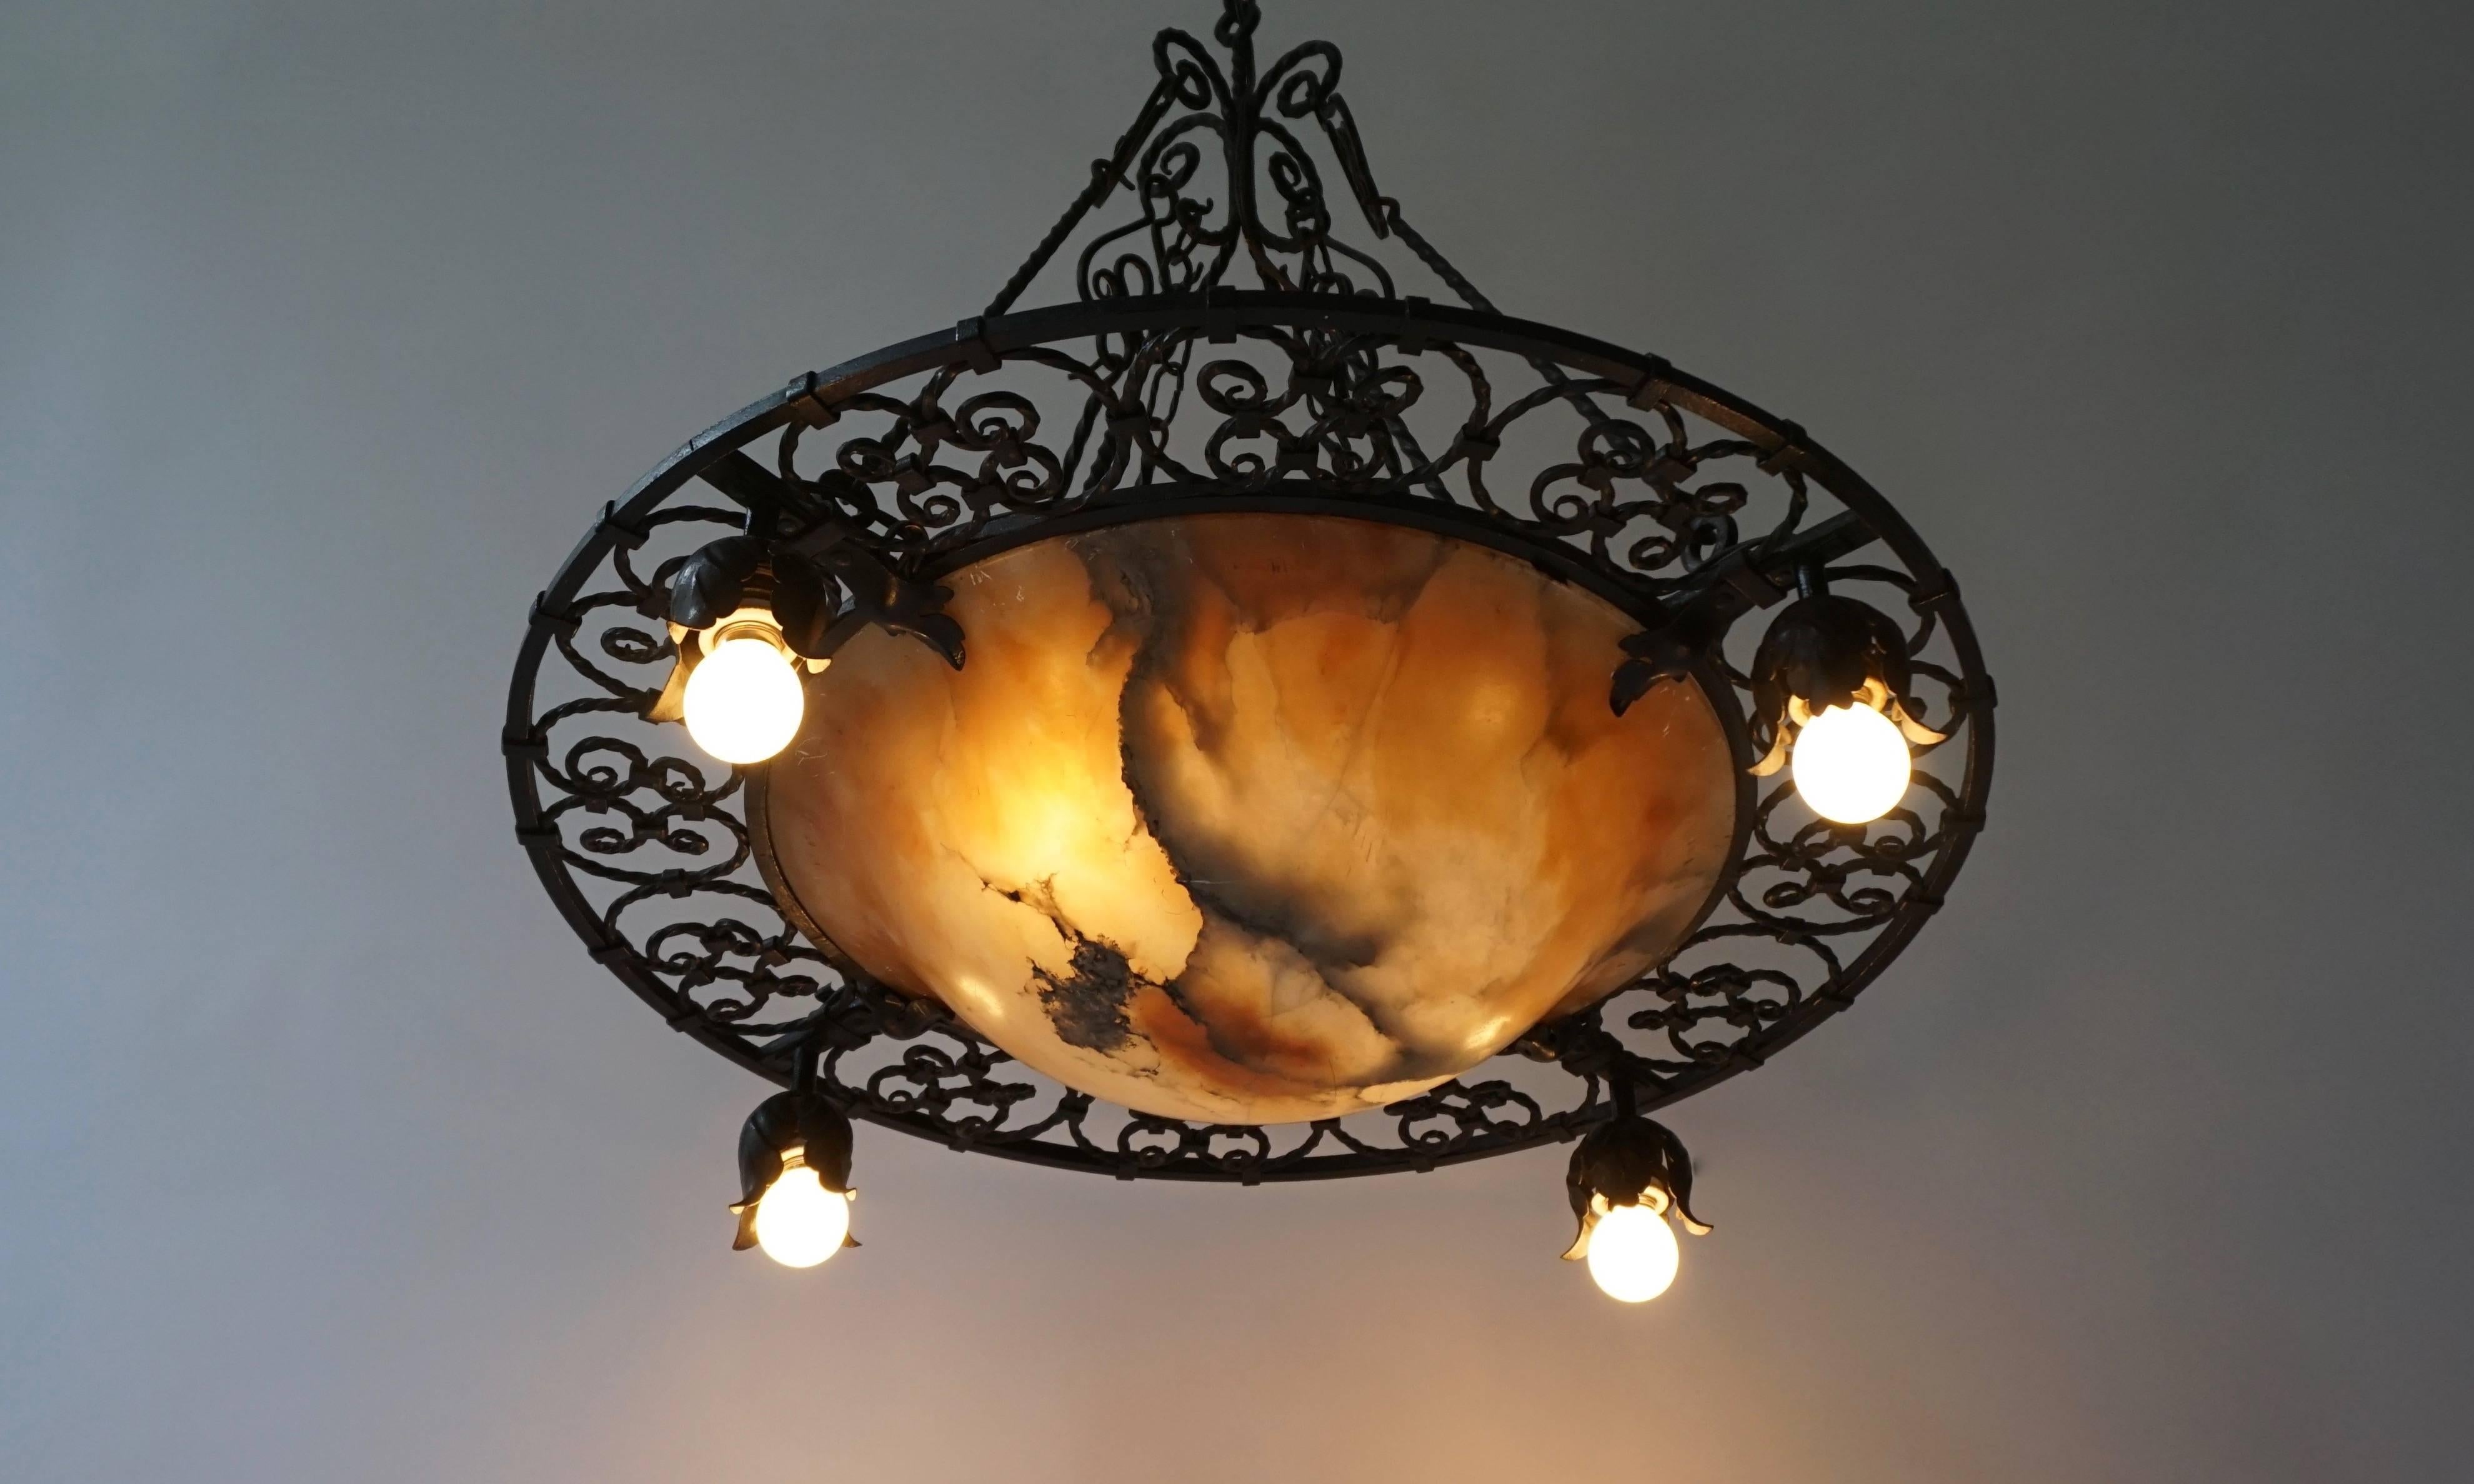 A wrought iron and alabaster Art Deco chandelier of typical shape, with four exterior lights hanging from flower bud sockets and additional lighting from within through the nicotine colored alabaster for atmosphere.
Diameter: 70 cm.
Heigth: 75